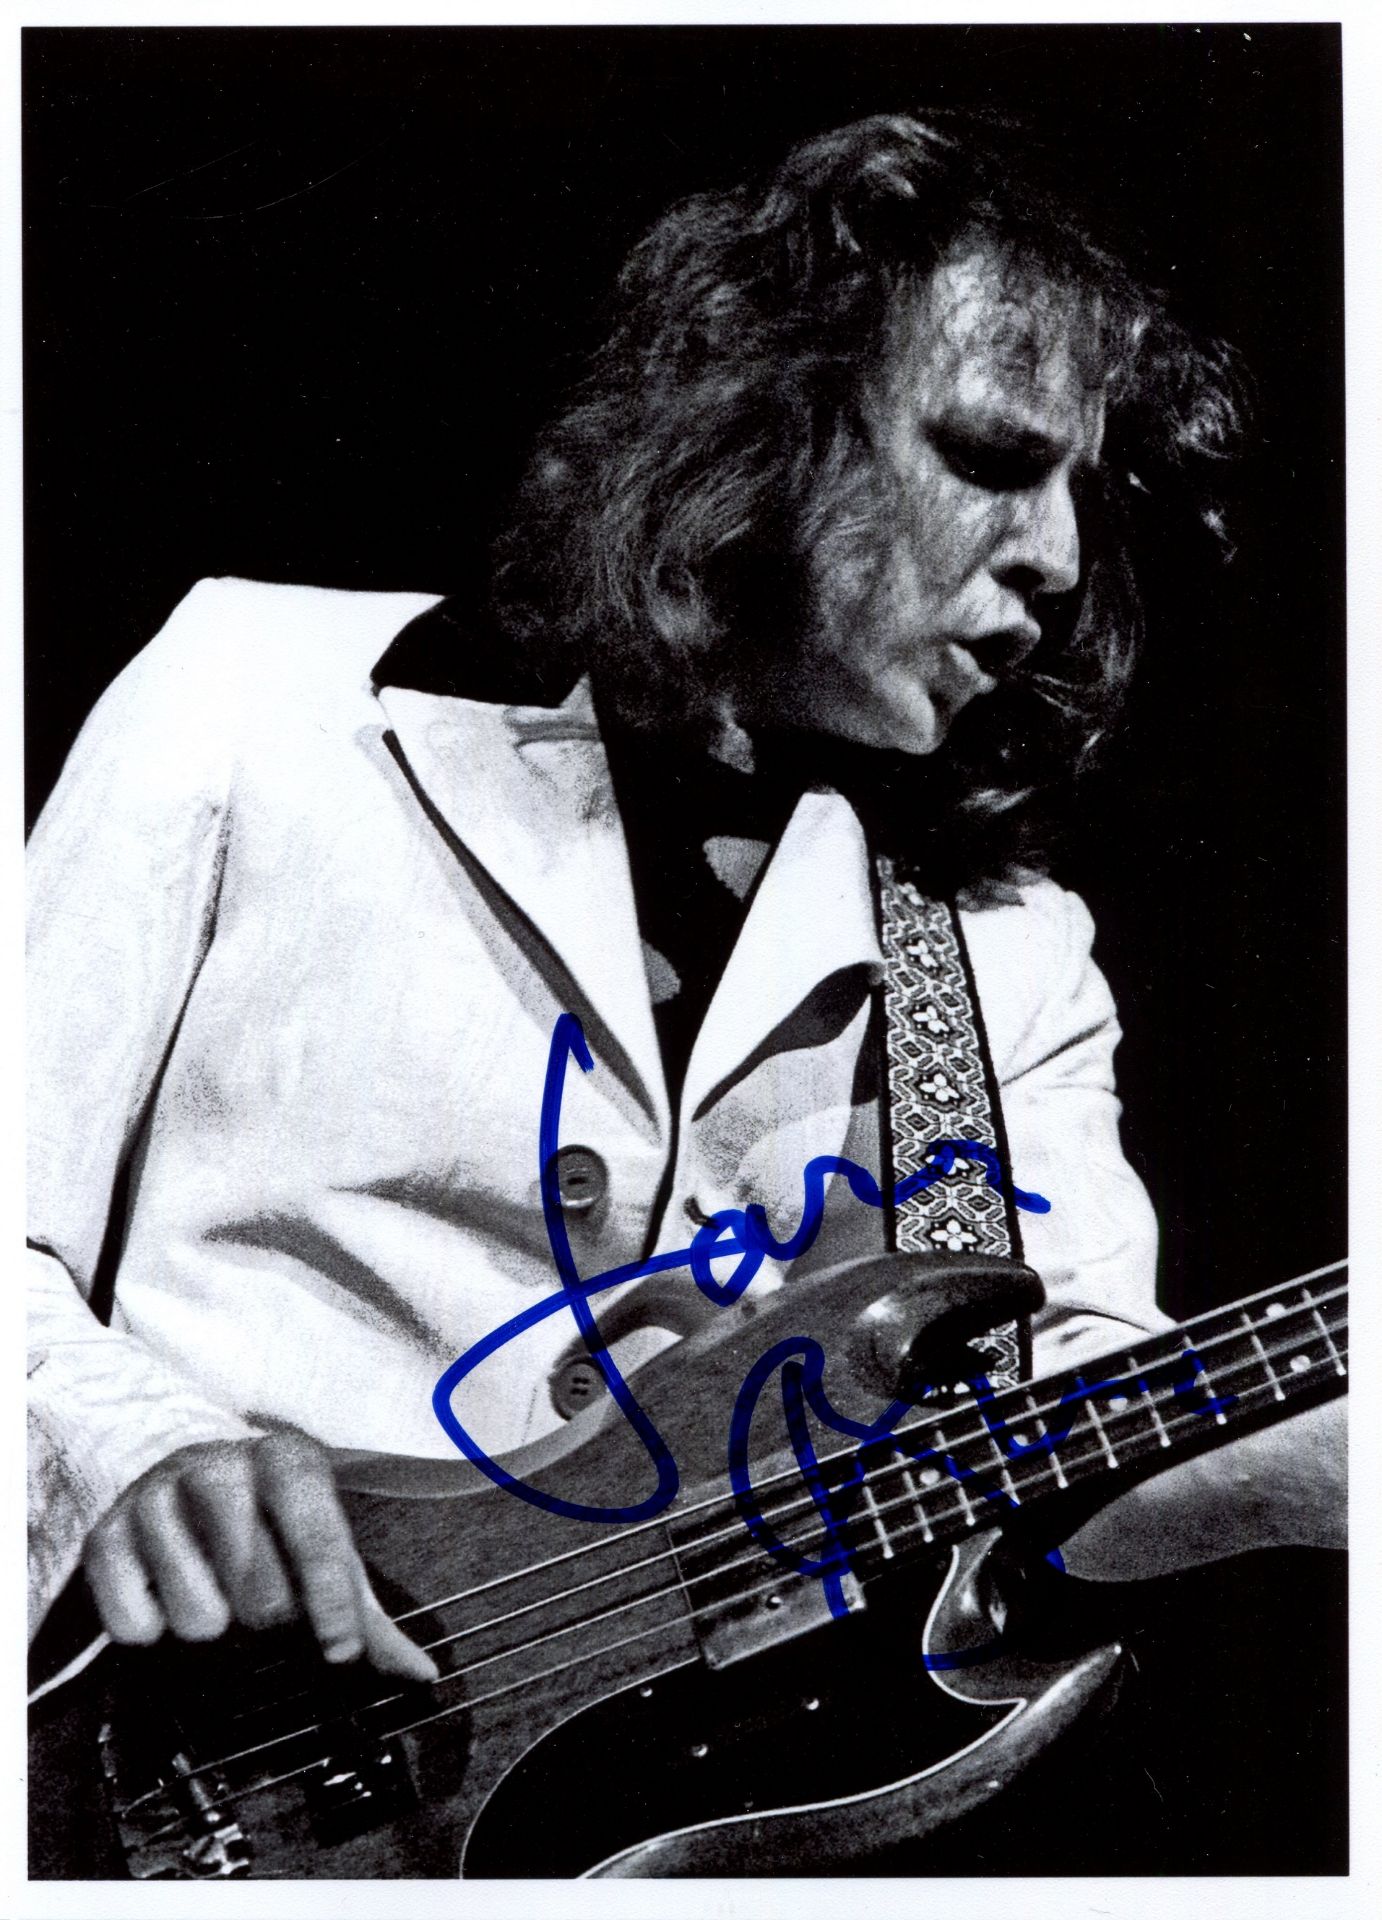 BRUCE JACK: (1943-2014) Scottish musician, lead vocalist and bassist with the rock band Cream.